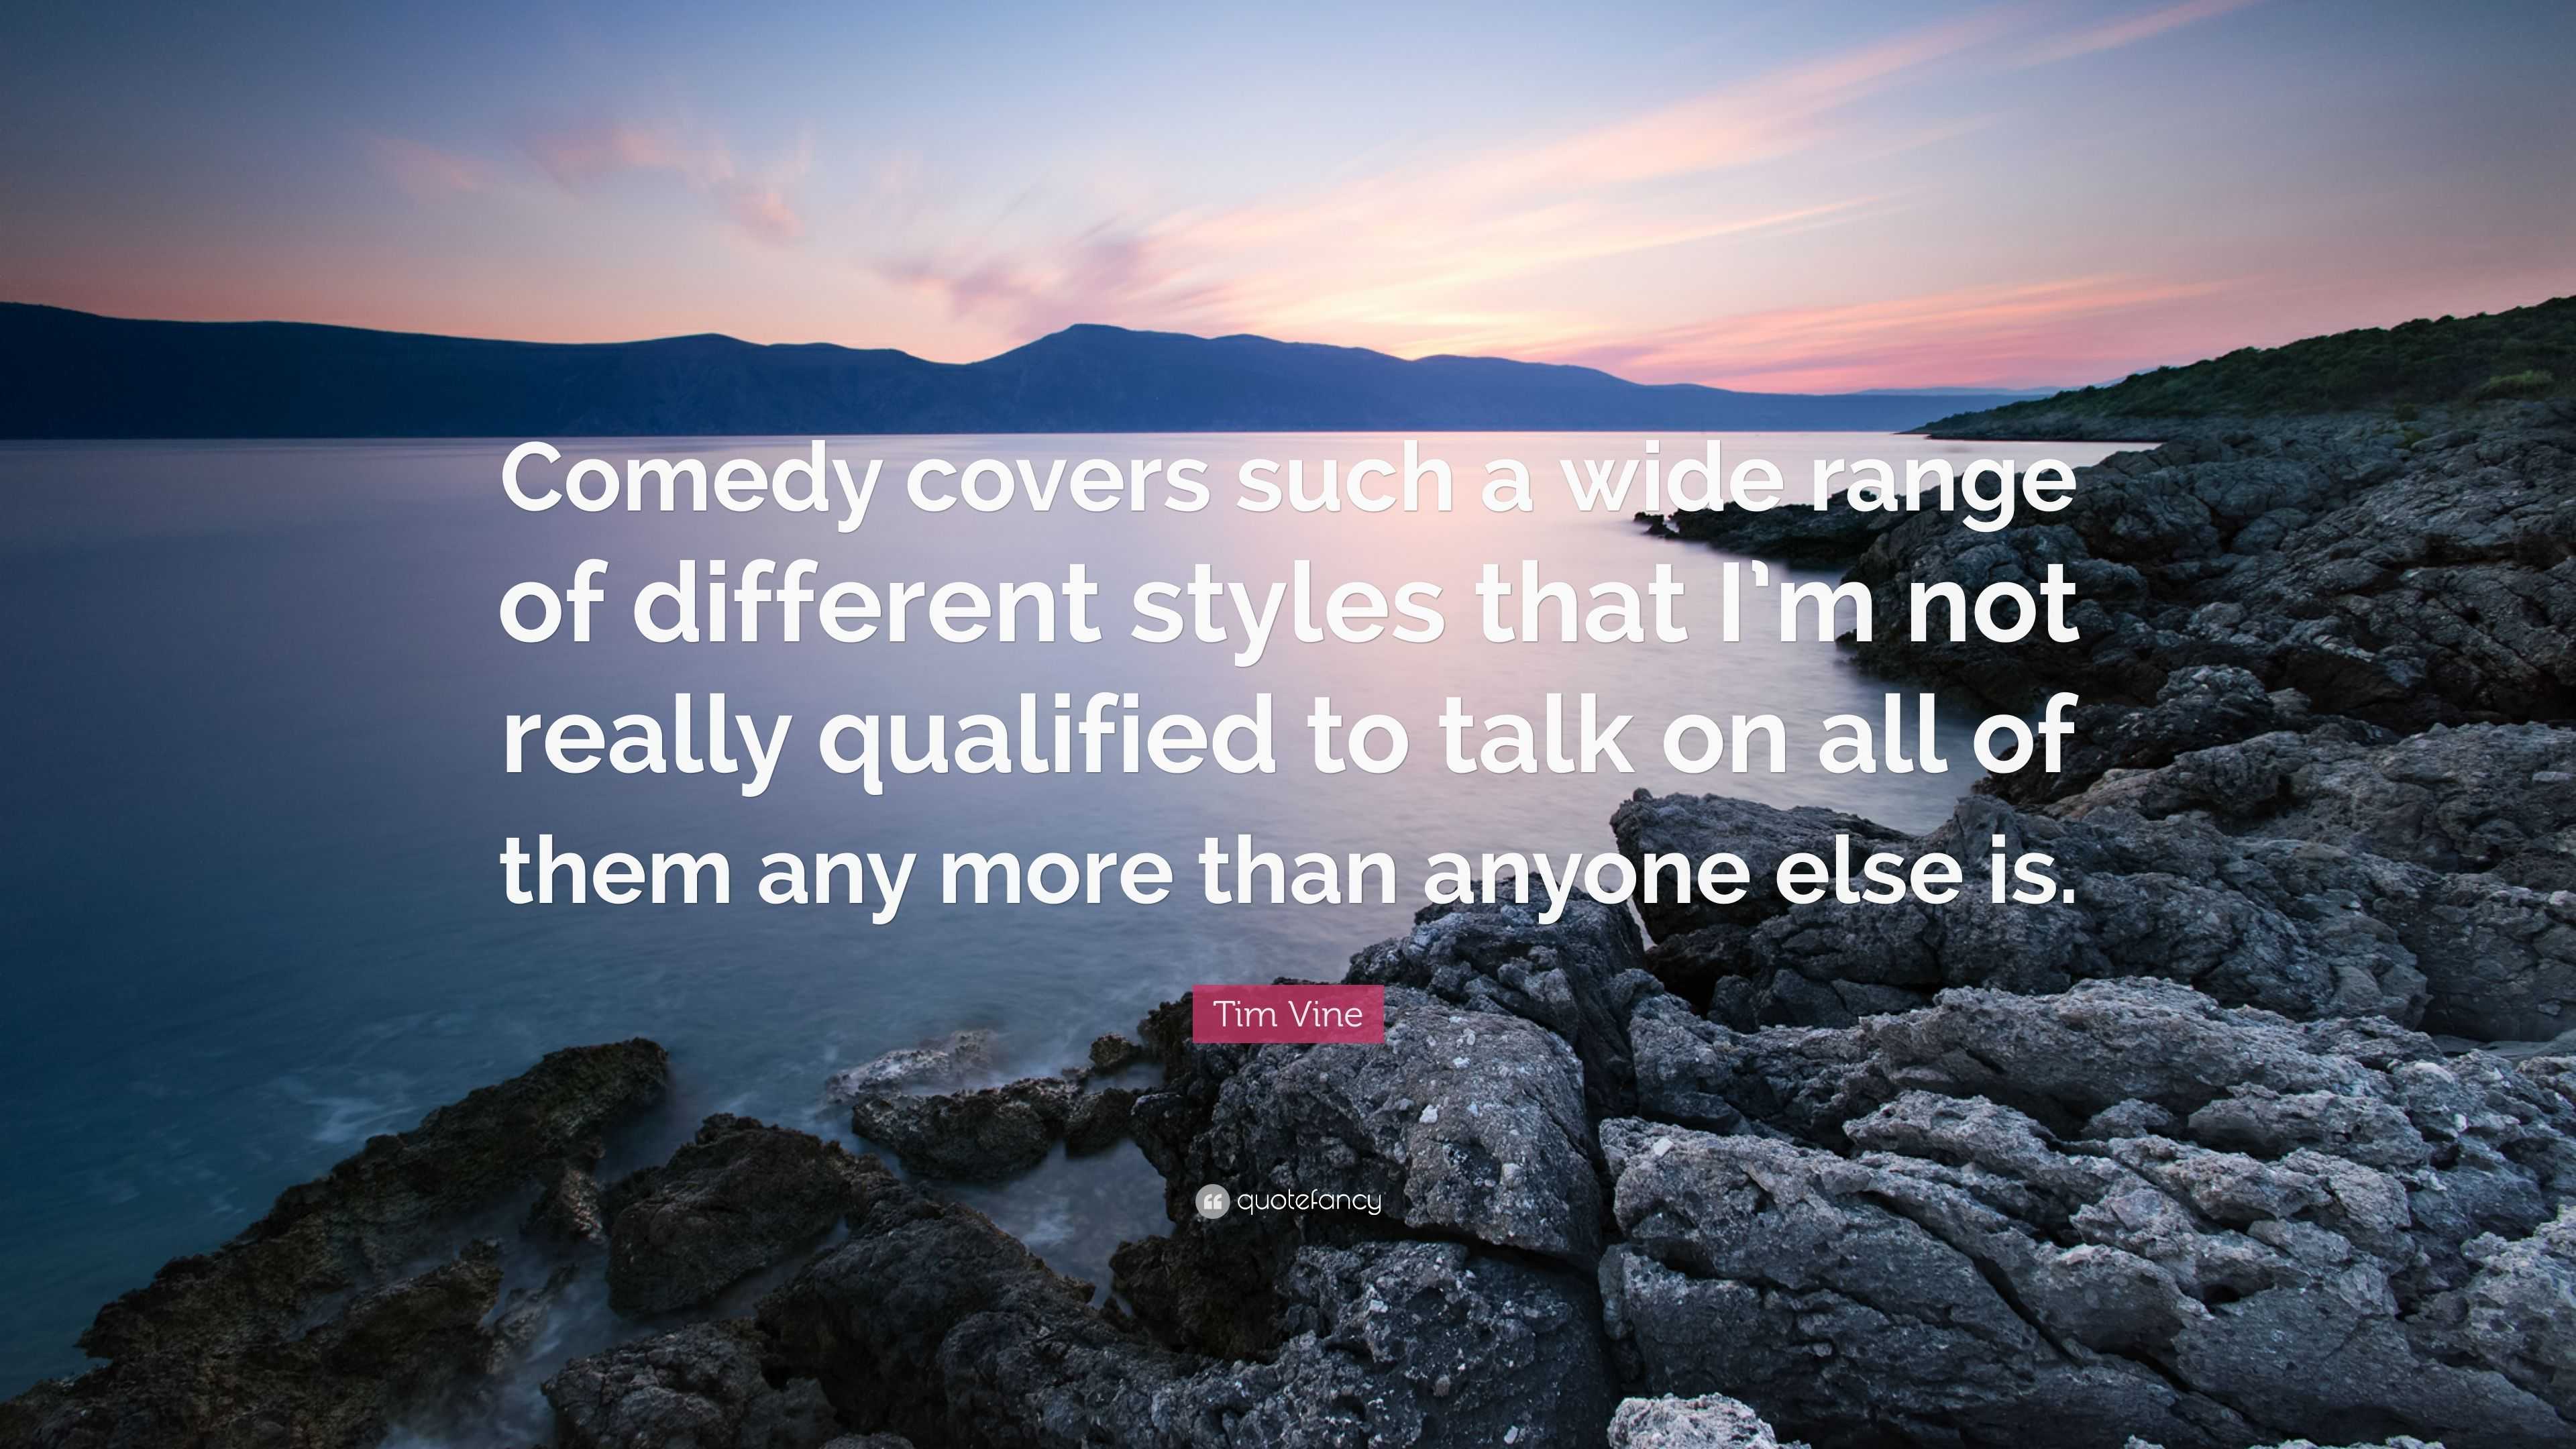 Tim Vine Quote: “Comedy covers such a wide range of different styles that  I'm not really qualified to talk on all of them any more than a...”